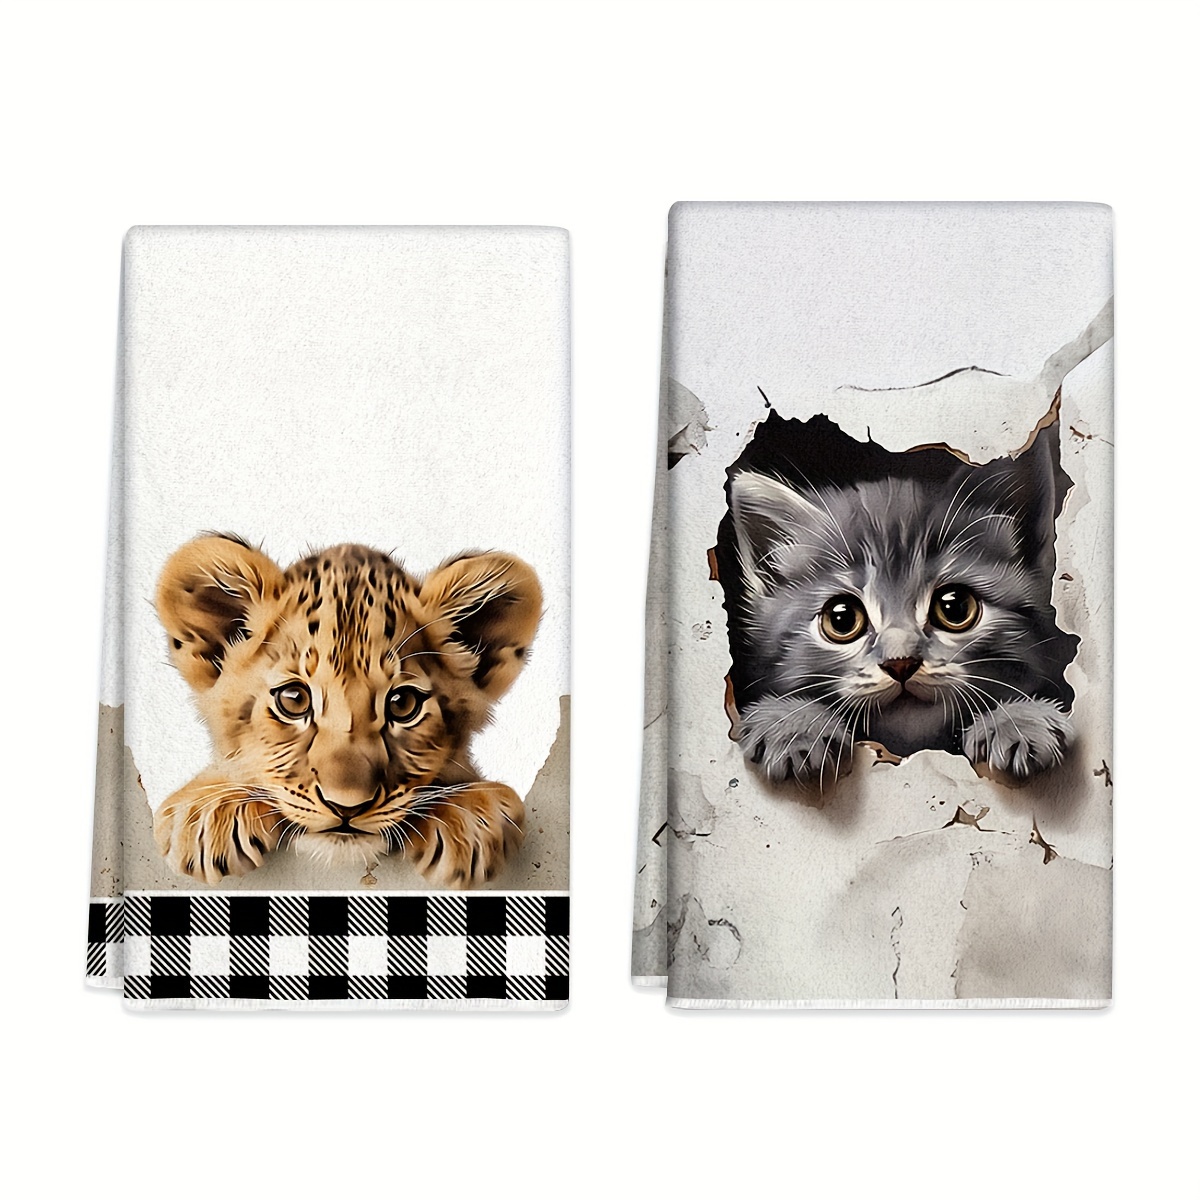 

2pcs, Dish Towels, Contemporary Tiger & Cat Microfiber Hand Towels, Kitchen Decor Dish Cloths, Absorbent Tea Towels For Cooking, Baking, Housewarming, Cleaning & Bathroom Use